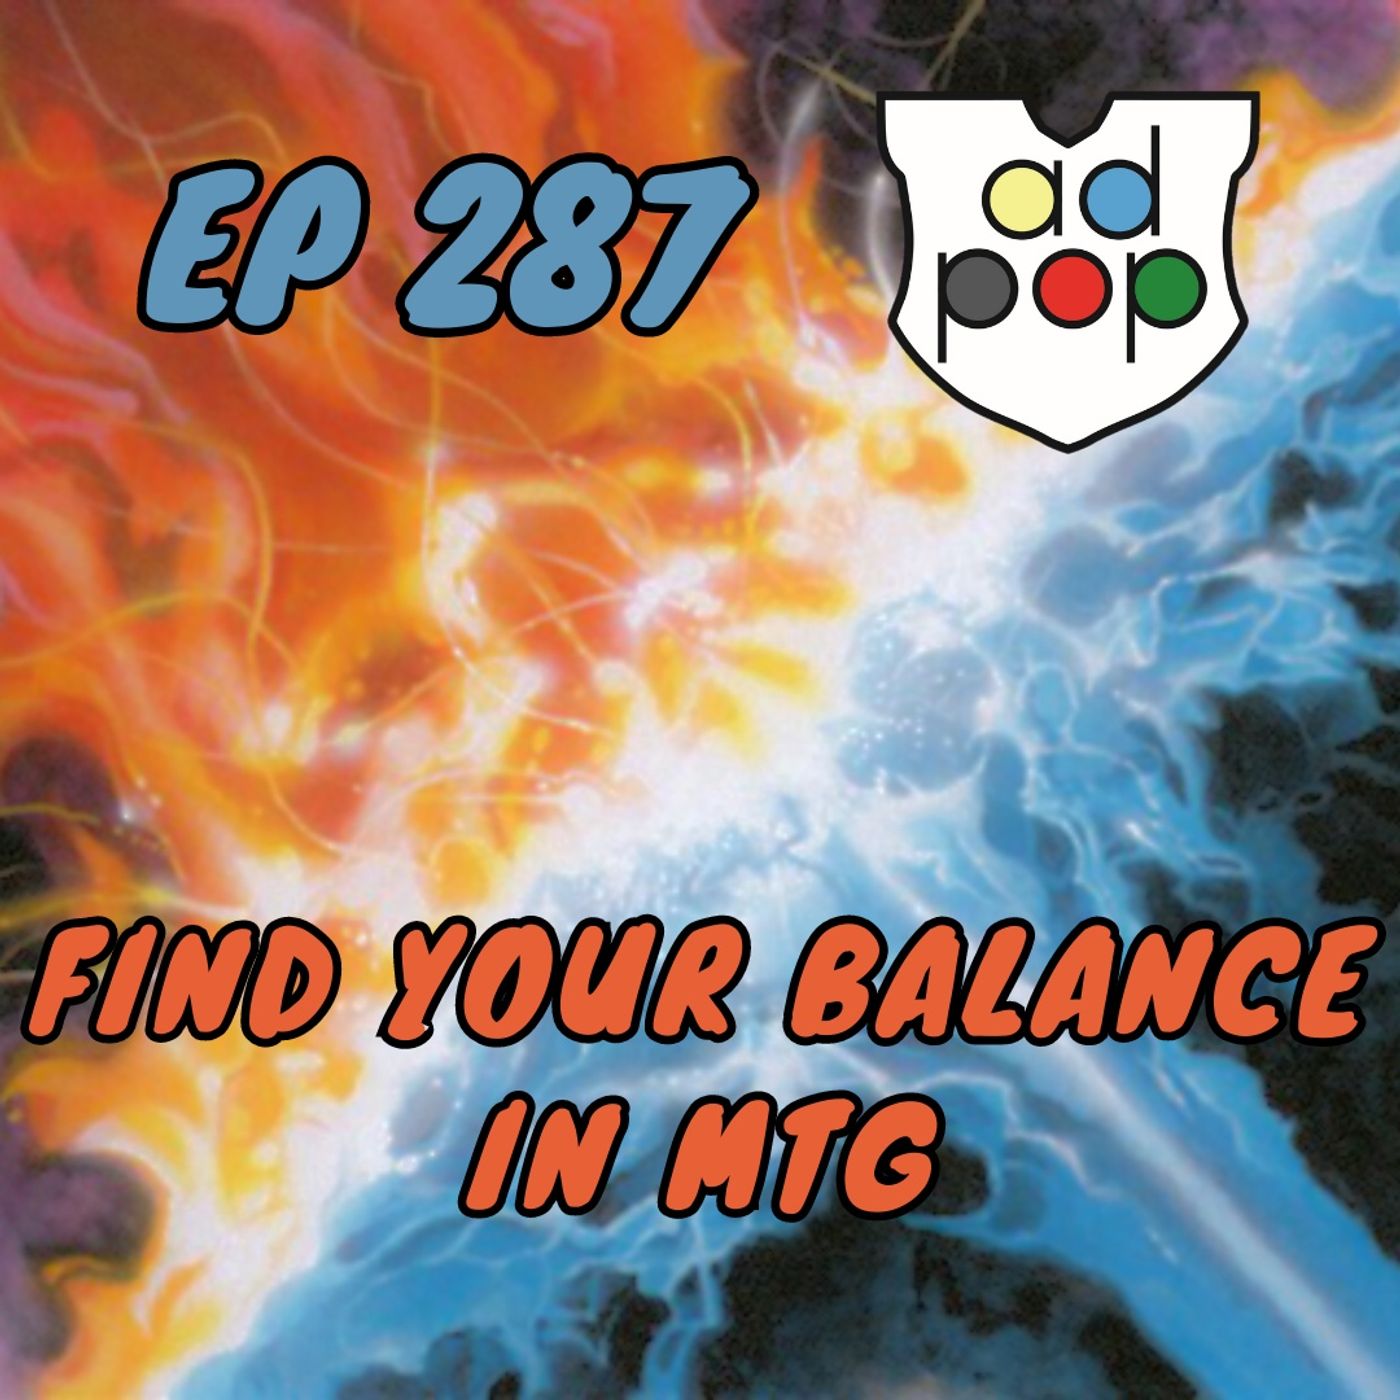 Commander ad Populum, Ep 287 - Finding your Balance in MTG